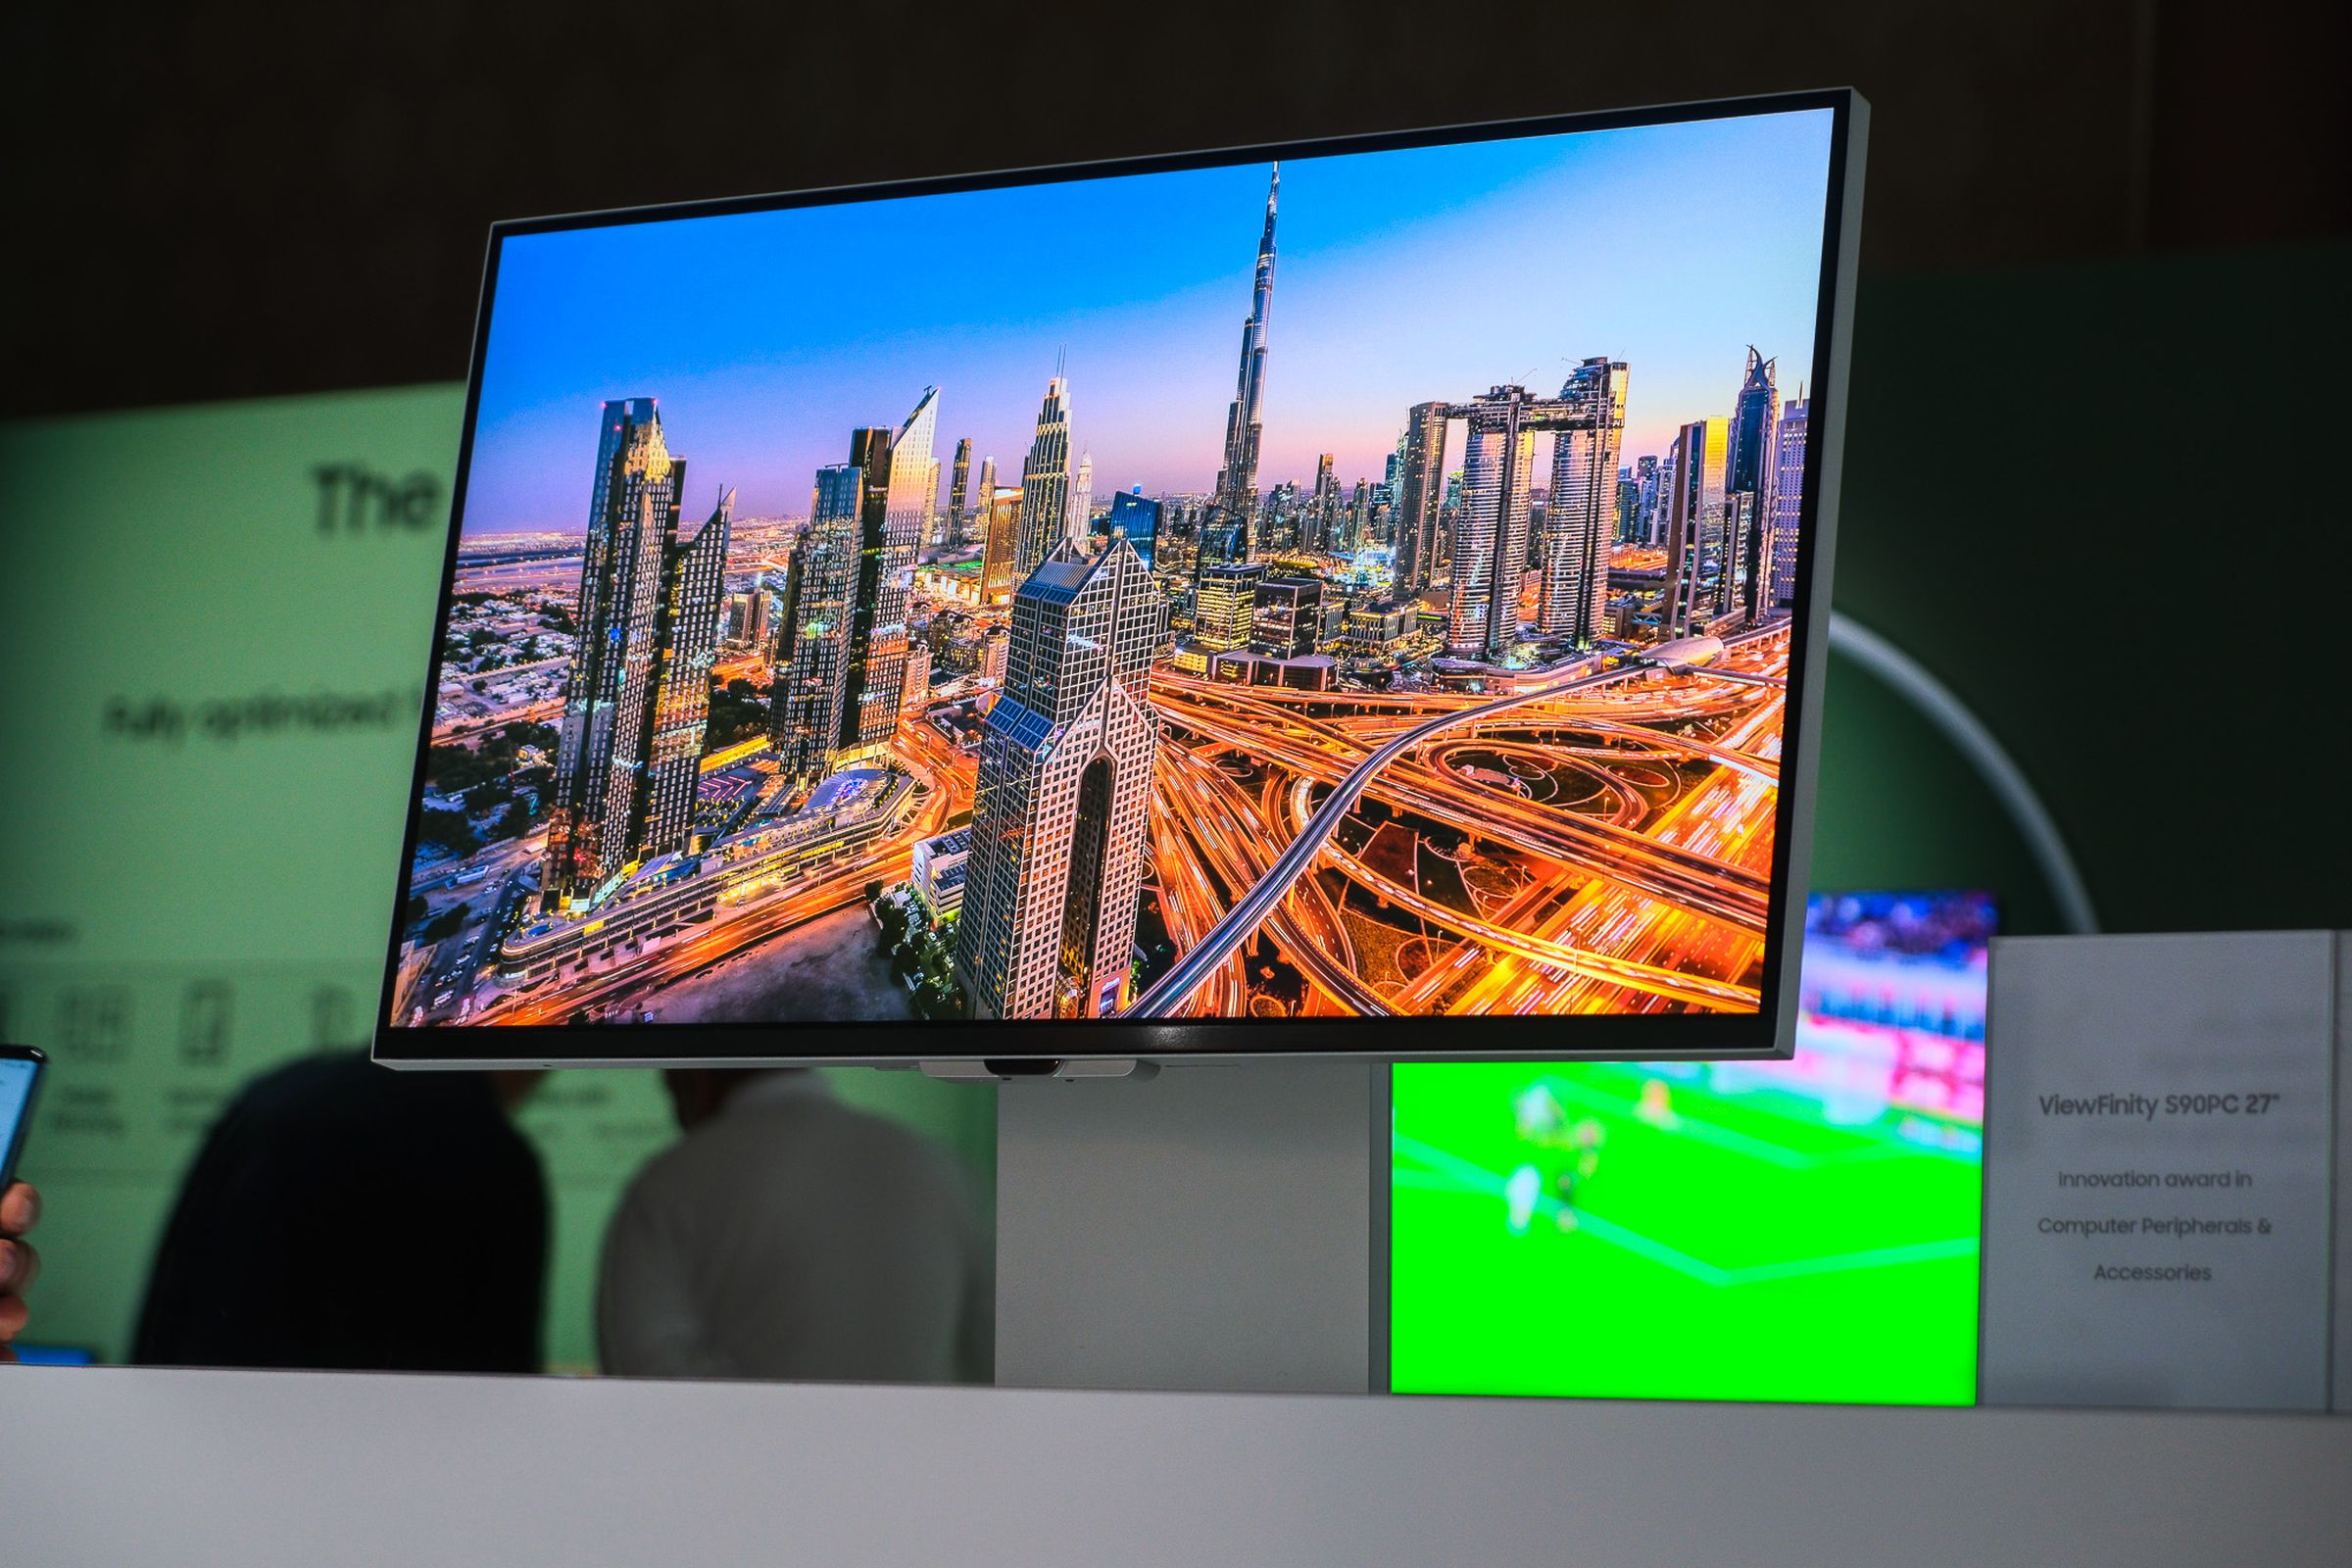 The ViewFinity S9 is the first true 5K monitor to come from Samsung.